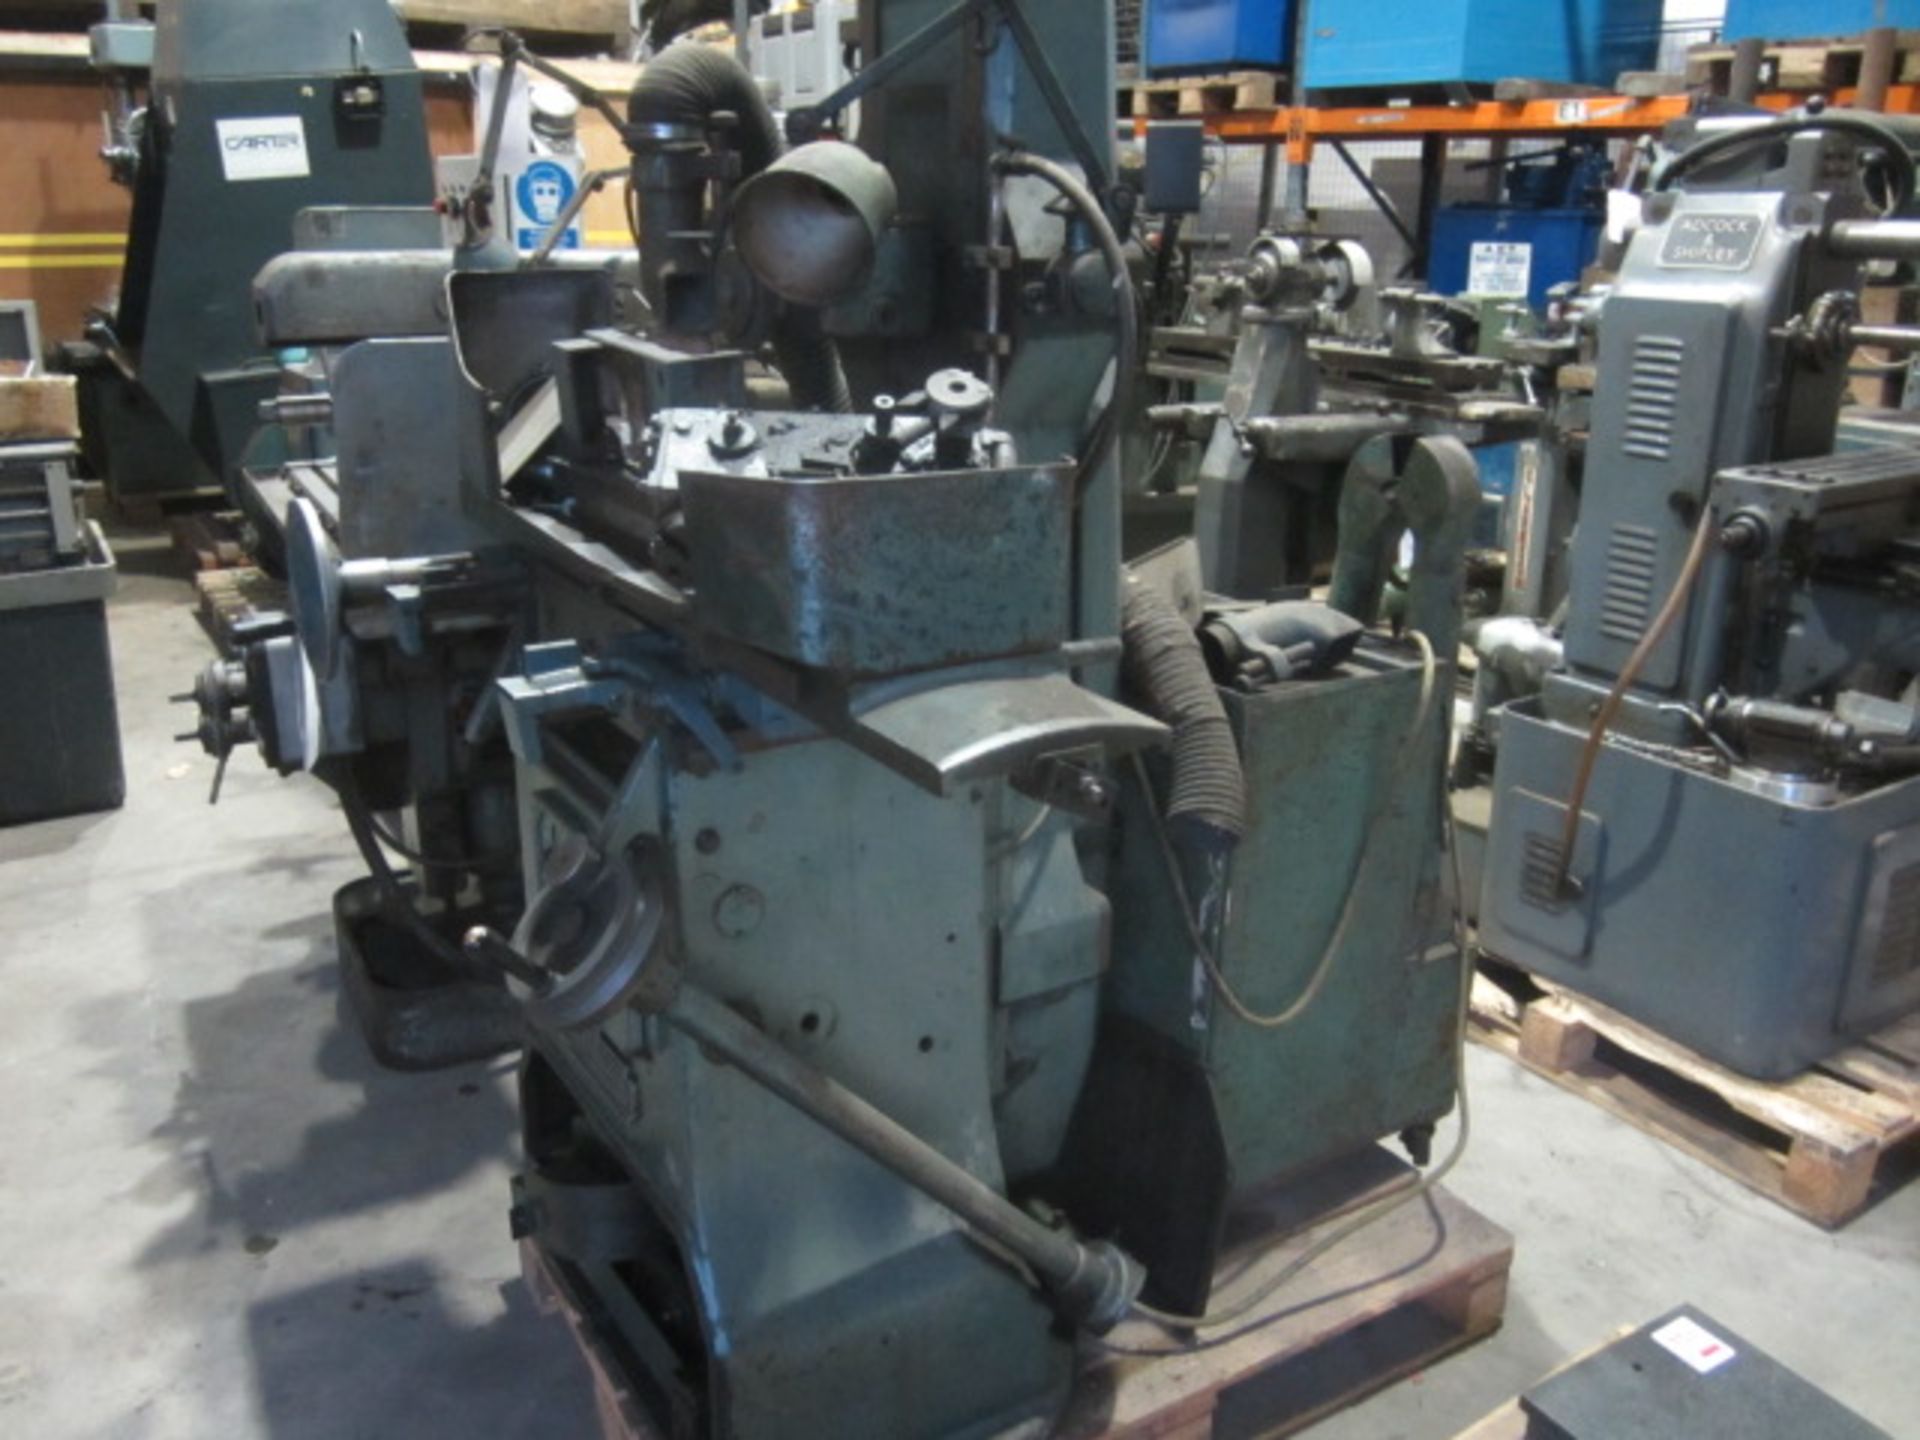 Jones & Shipman 540 H horizontal spindle surface grinder - for spares only. A mandatory lift out